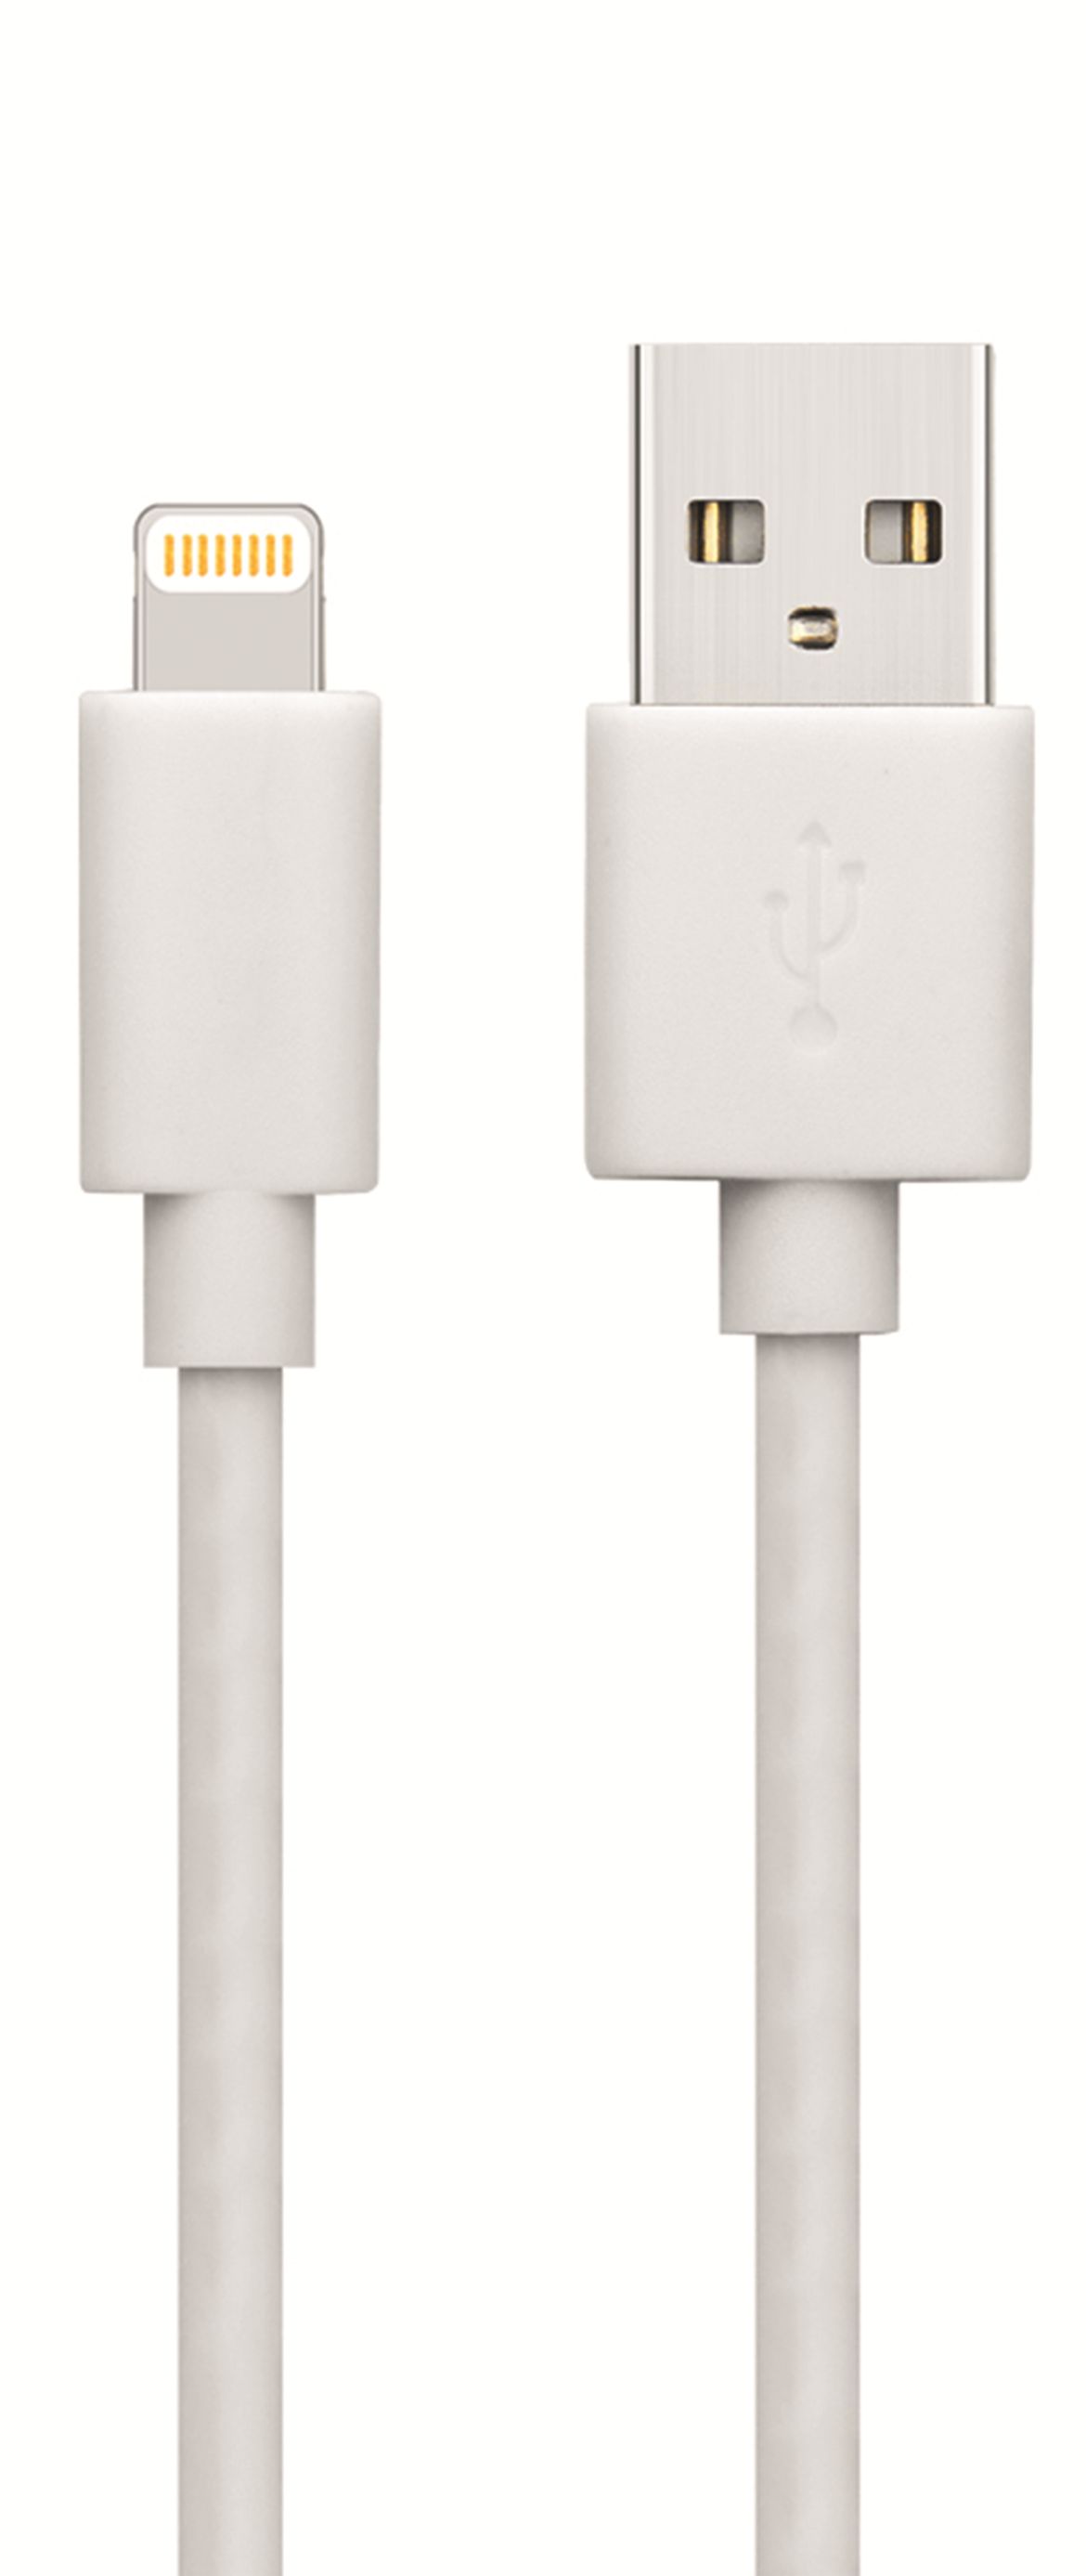 Snug Apple Lightning USB Cable - Avail in: White